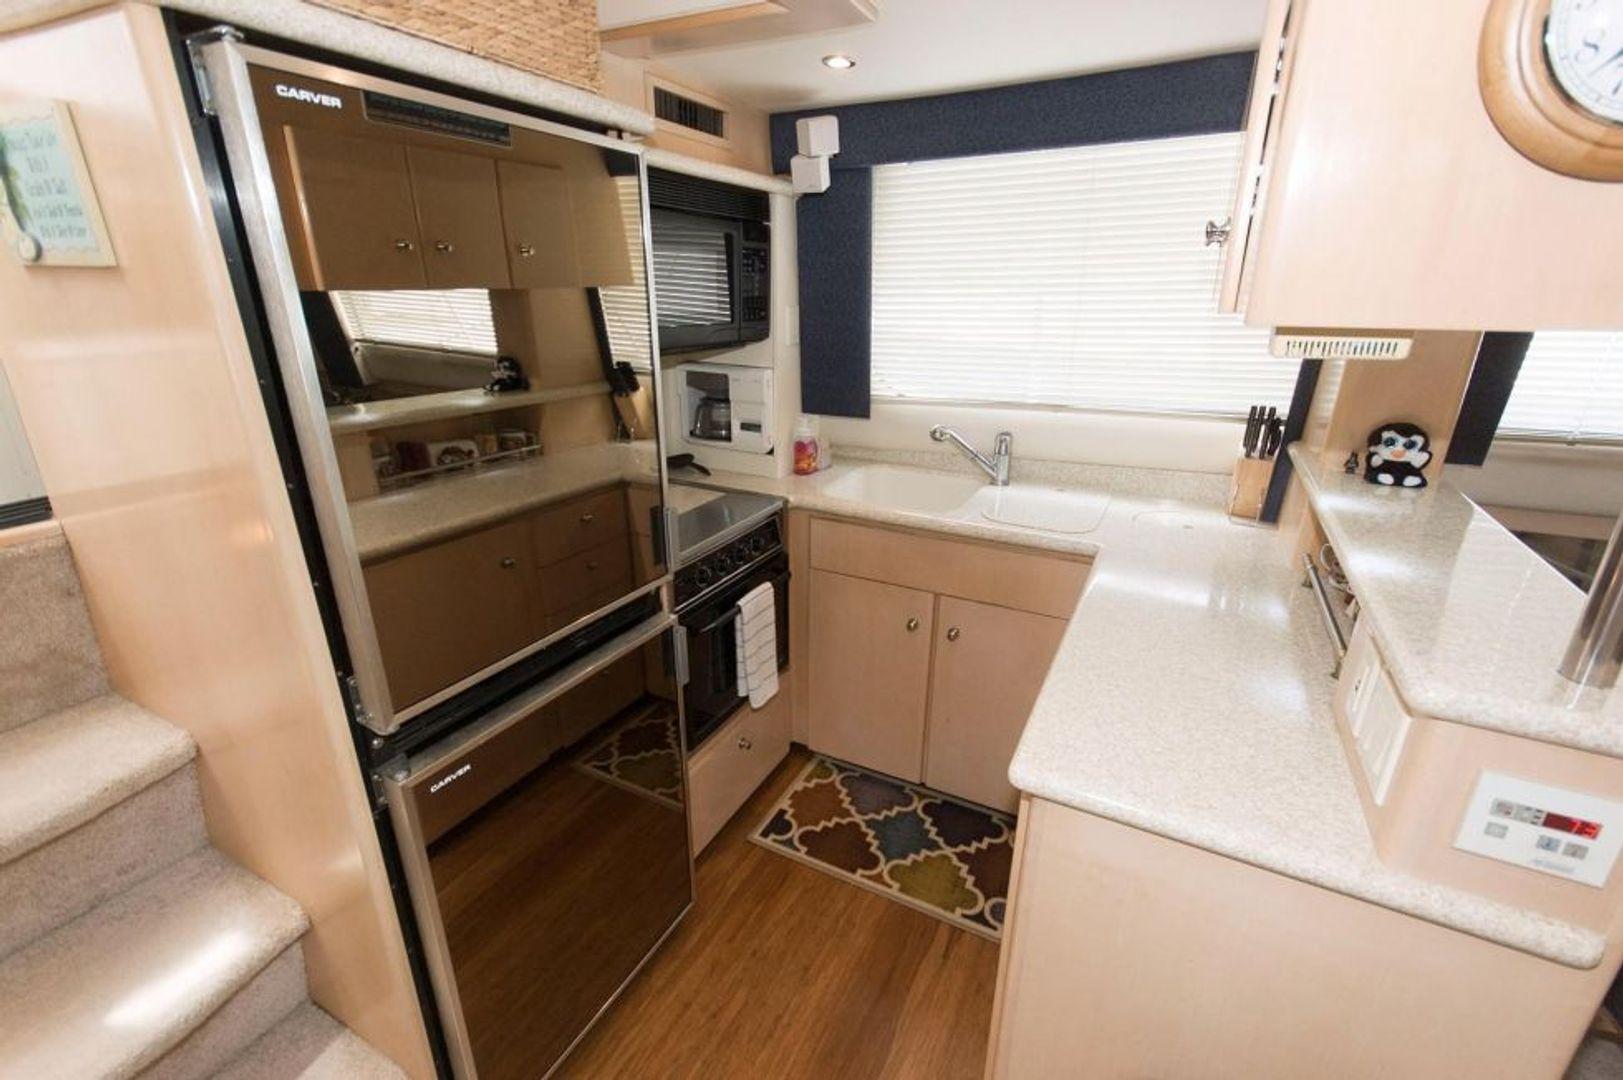 Galley down on port side. Refrigerator on top. Freezer on bottom. Convection microwave. Built in coffee maker. Stove/range has been upgraded in 2021. 